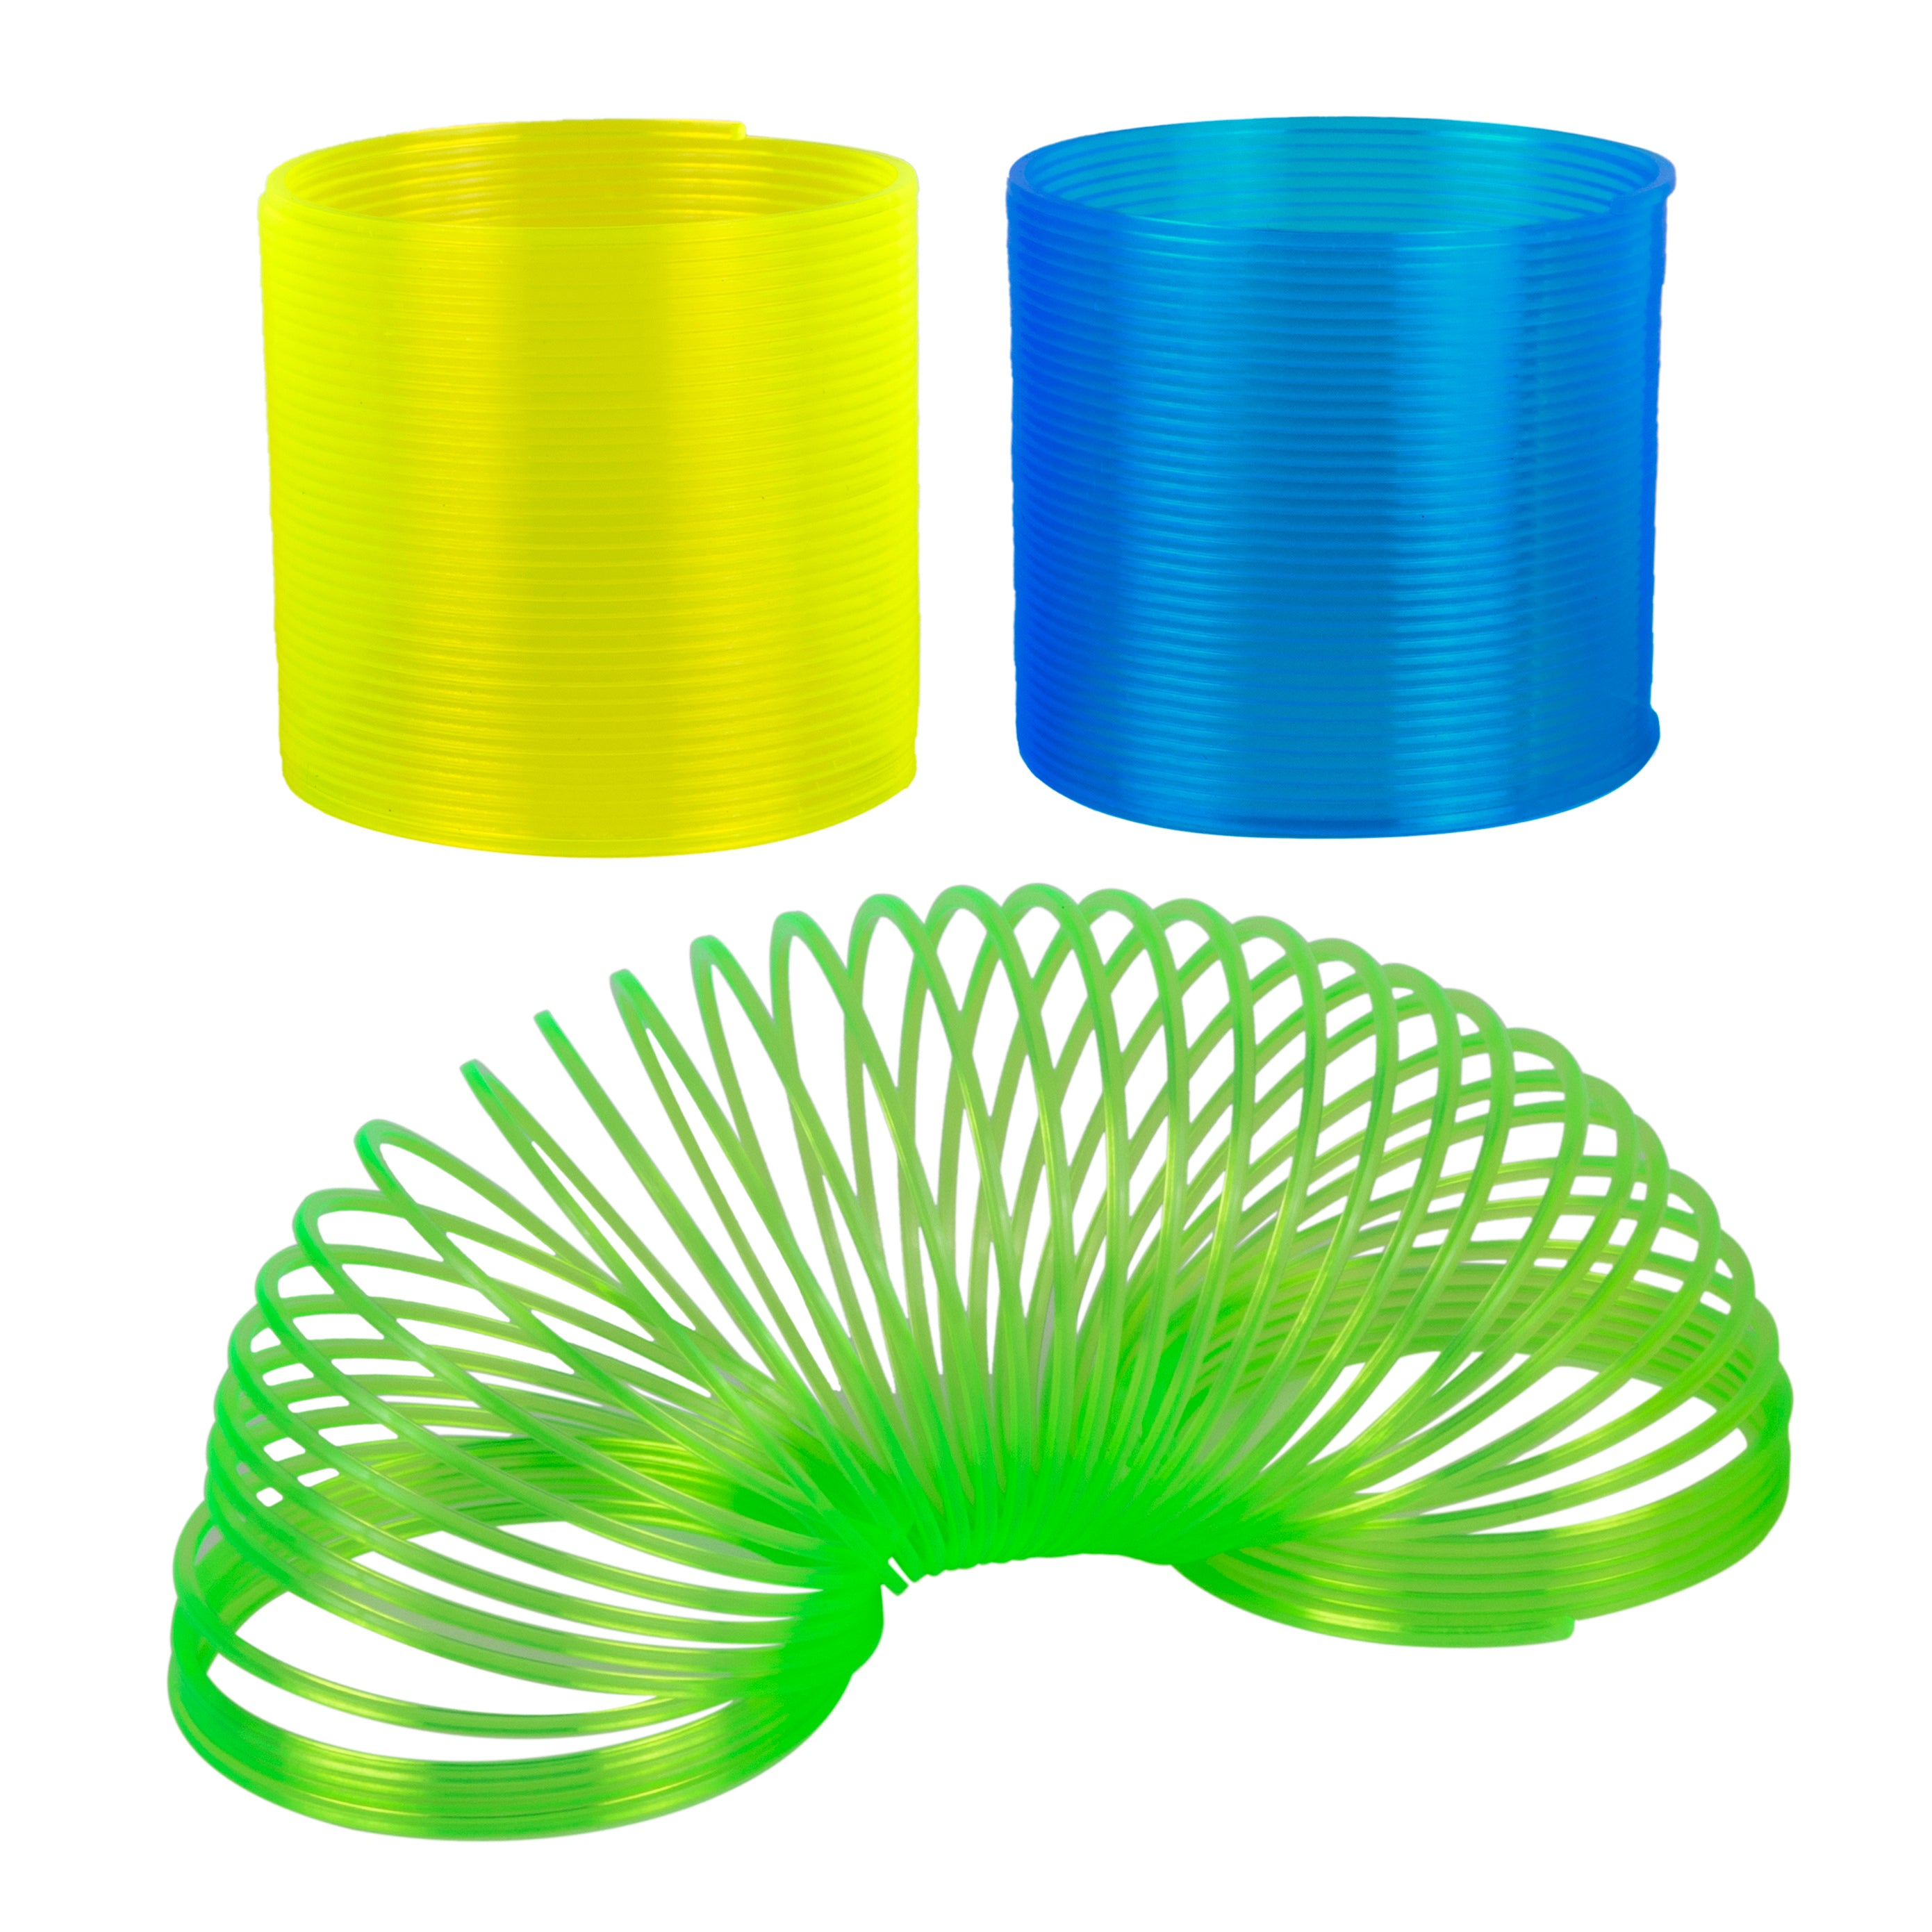 Plastic Spring Toy - Assorted Colors